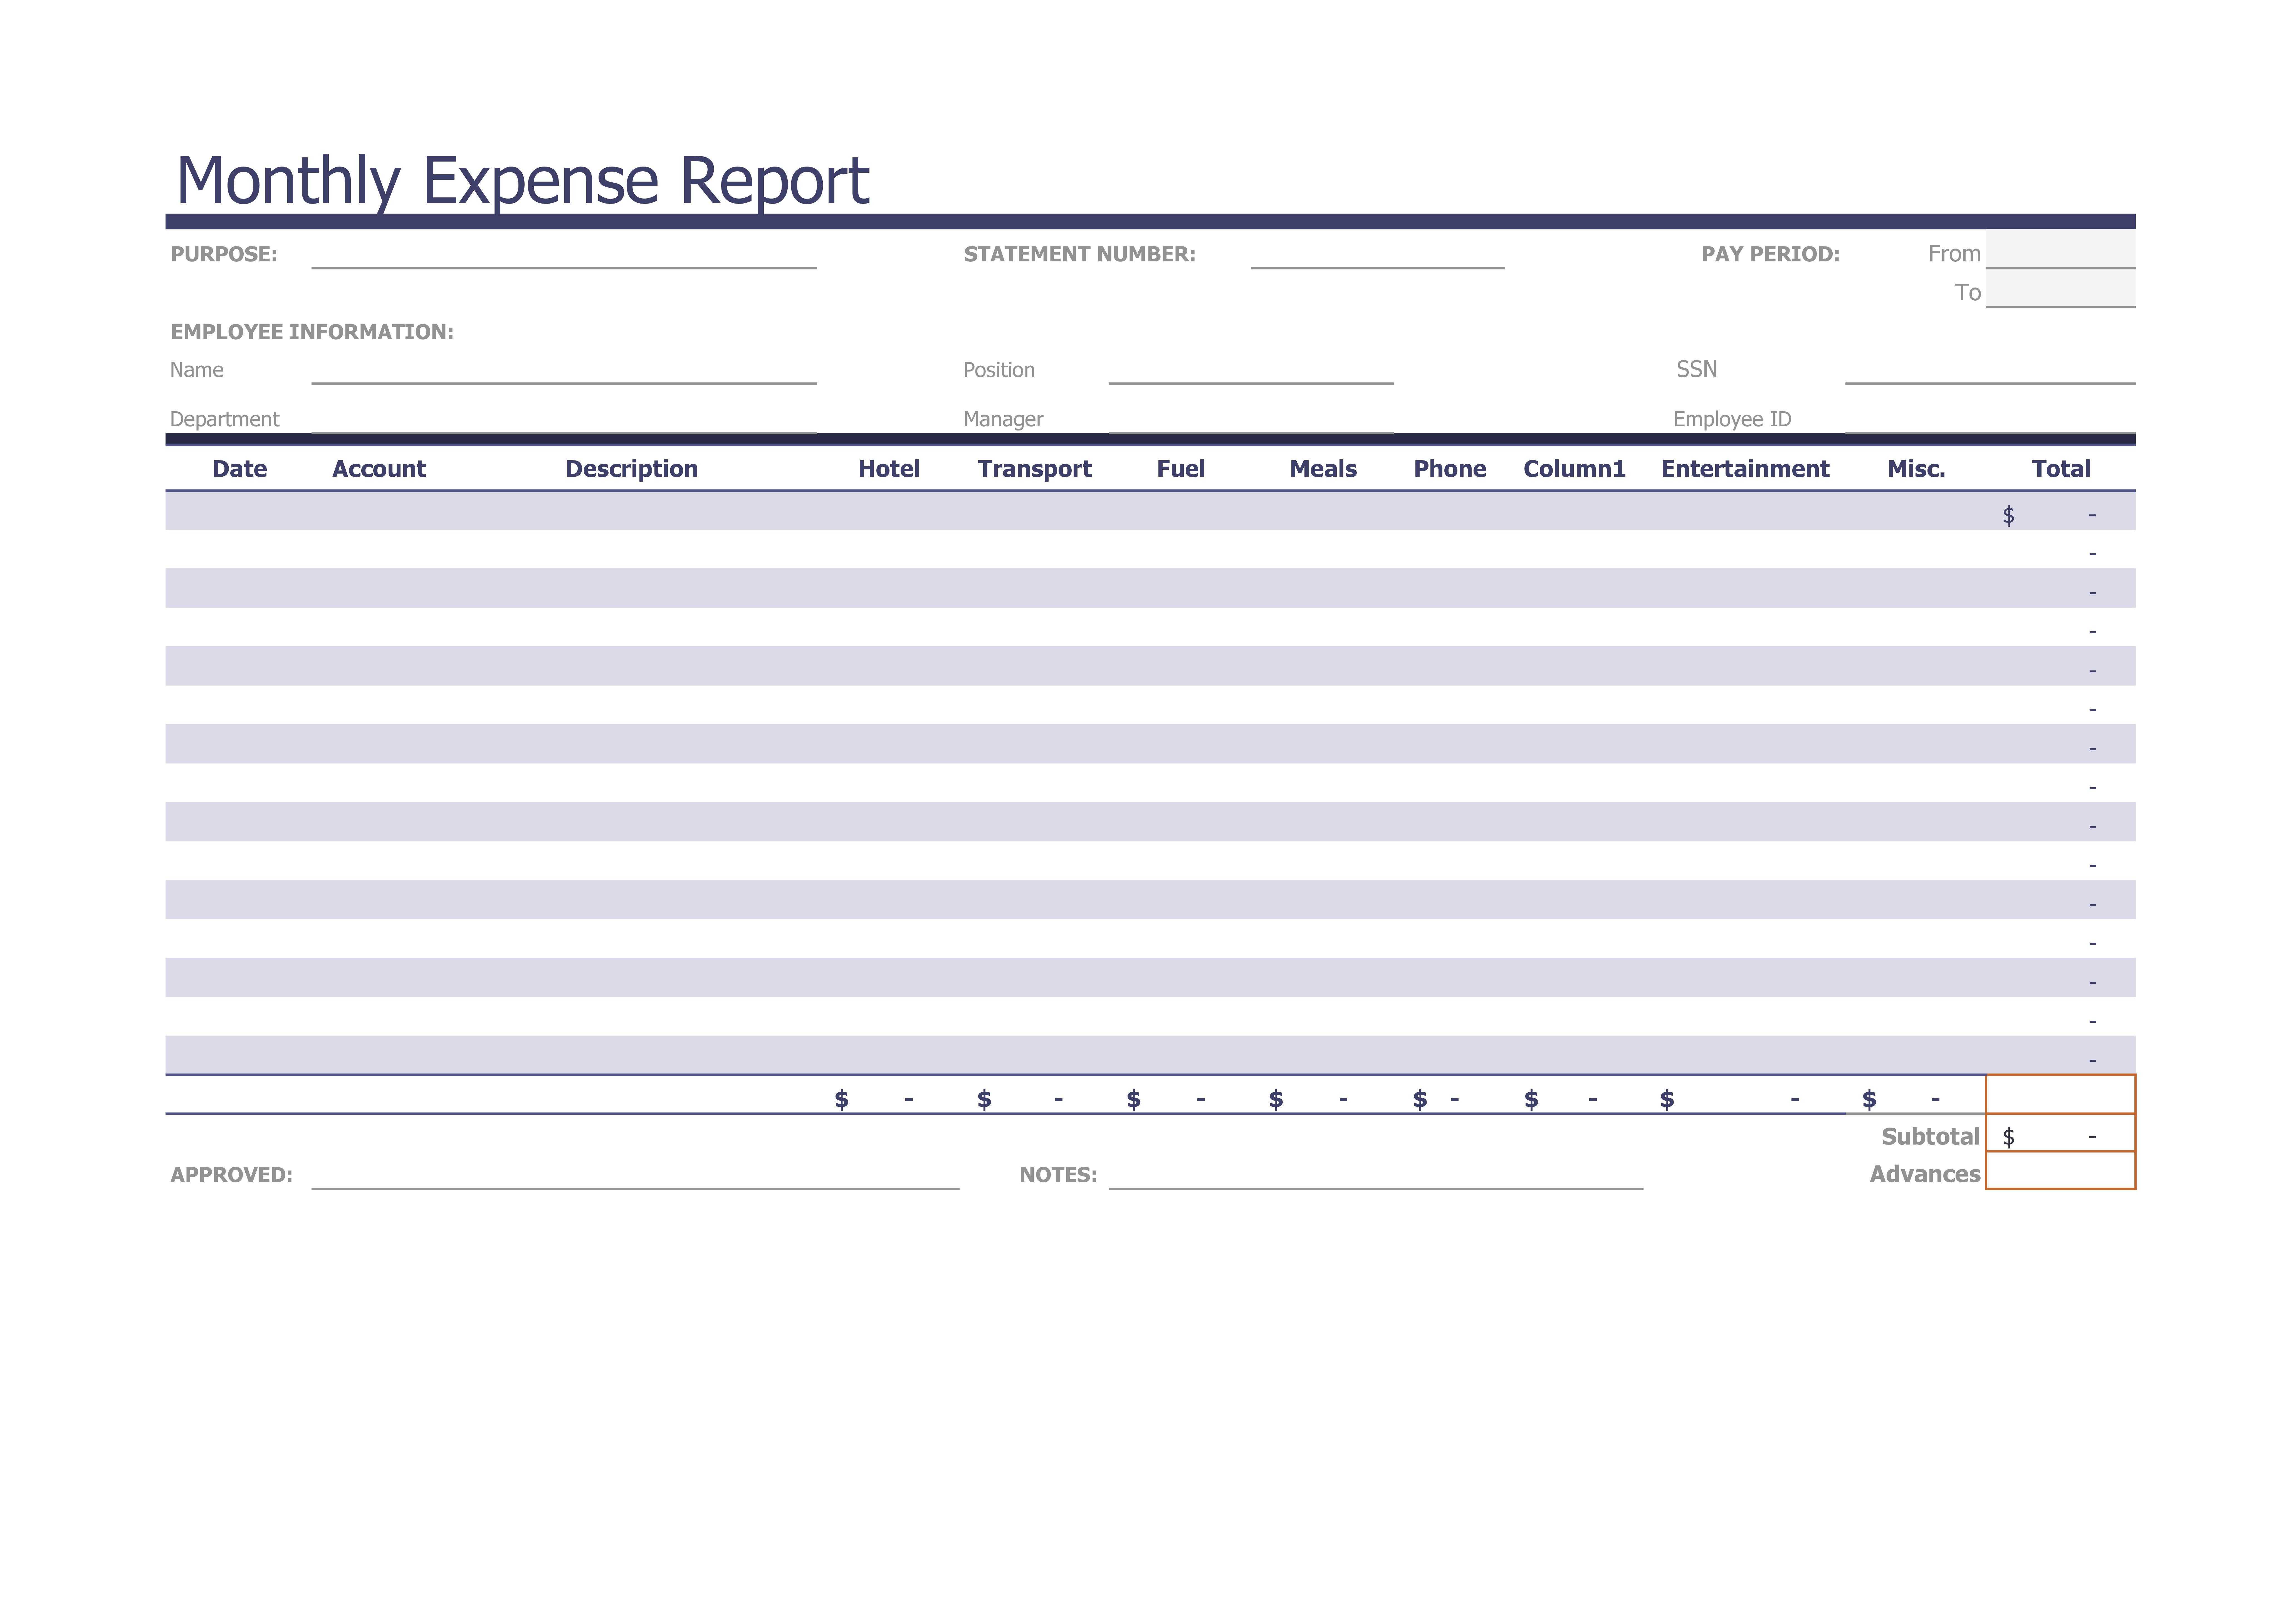 40+ Expense Report Templates To Help You Save Money ᐅ Intended For Monthly Expense Report Template Excel